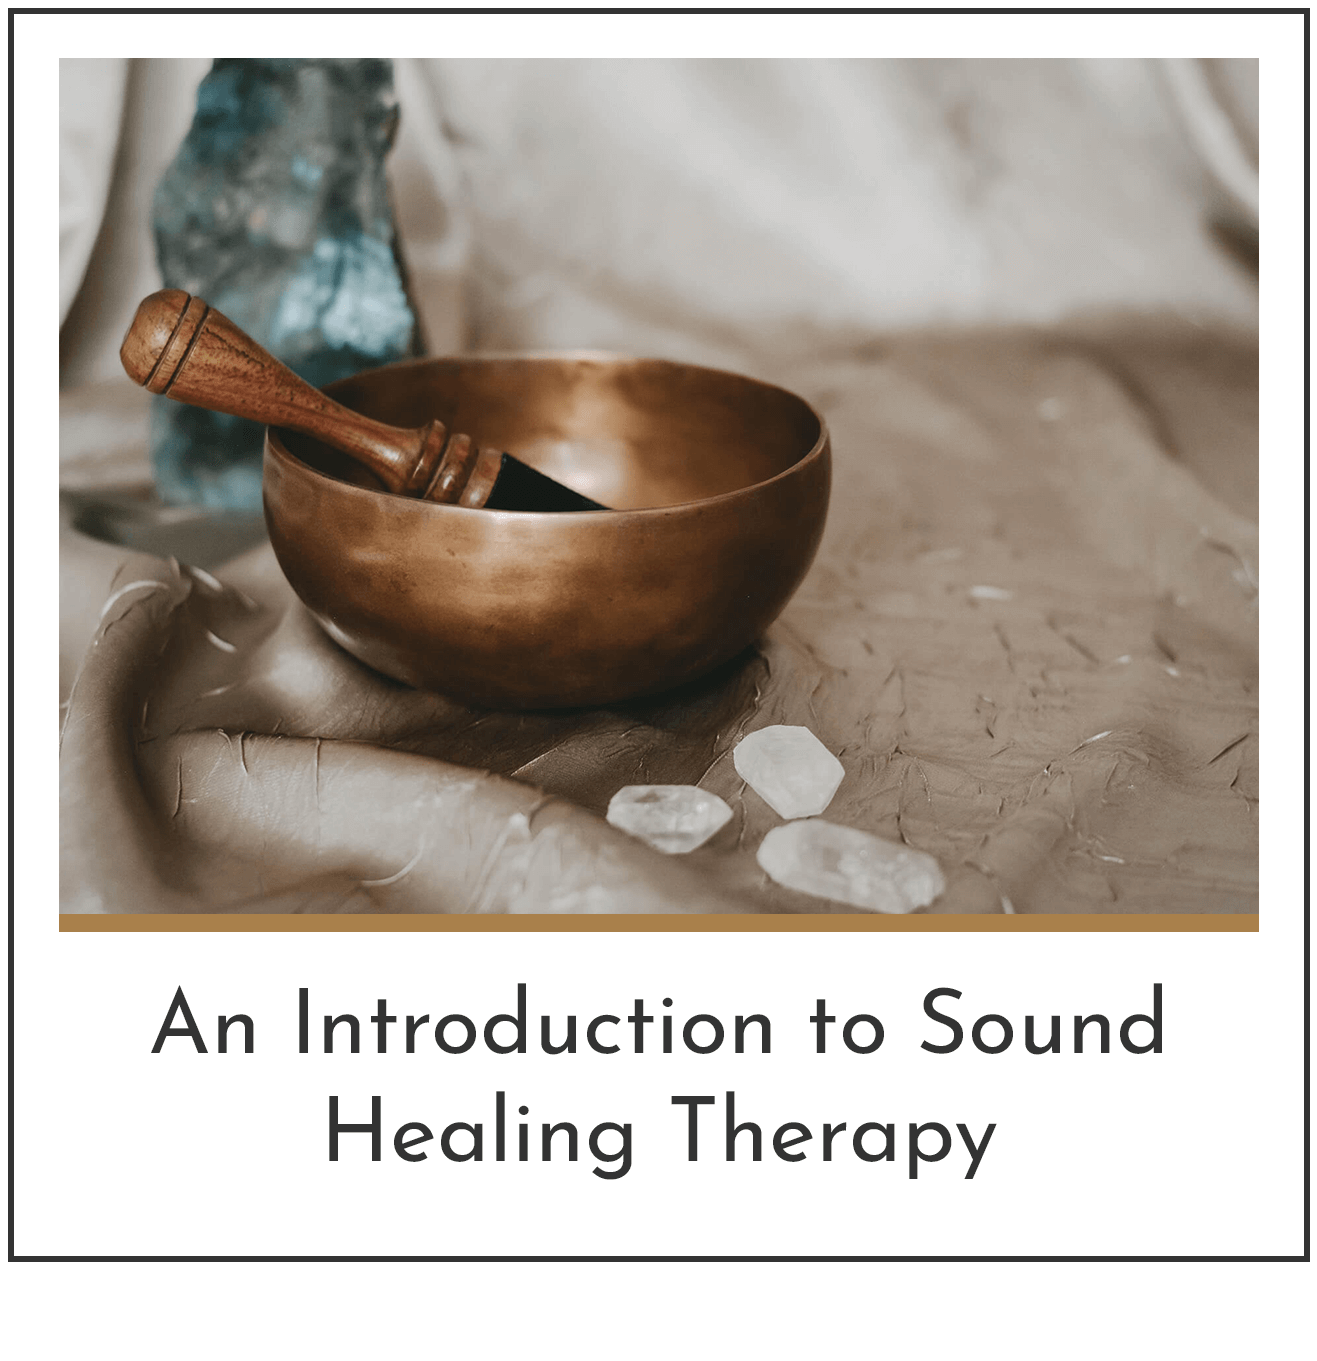 An Introduction to Sound Healing Therapy